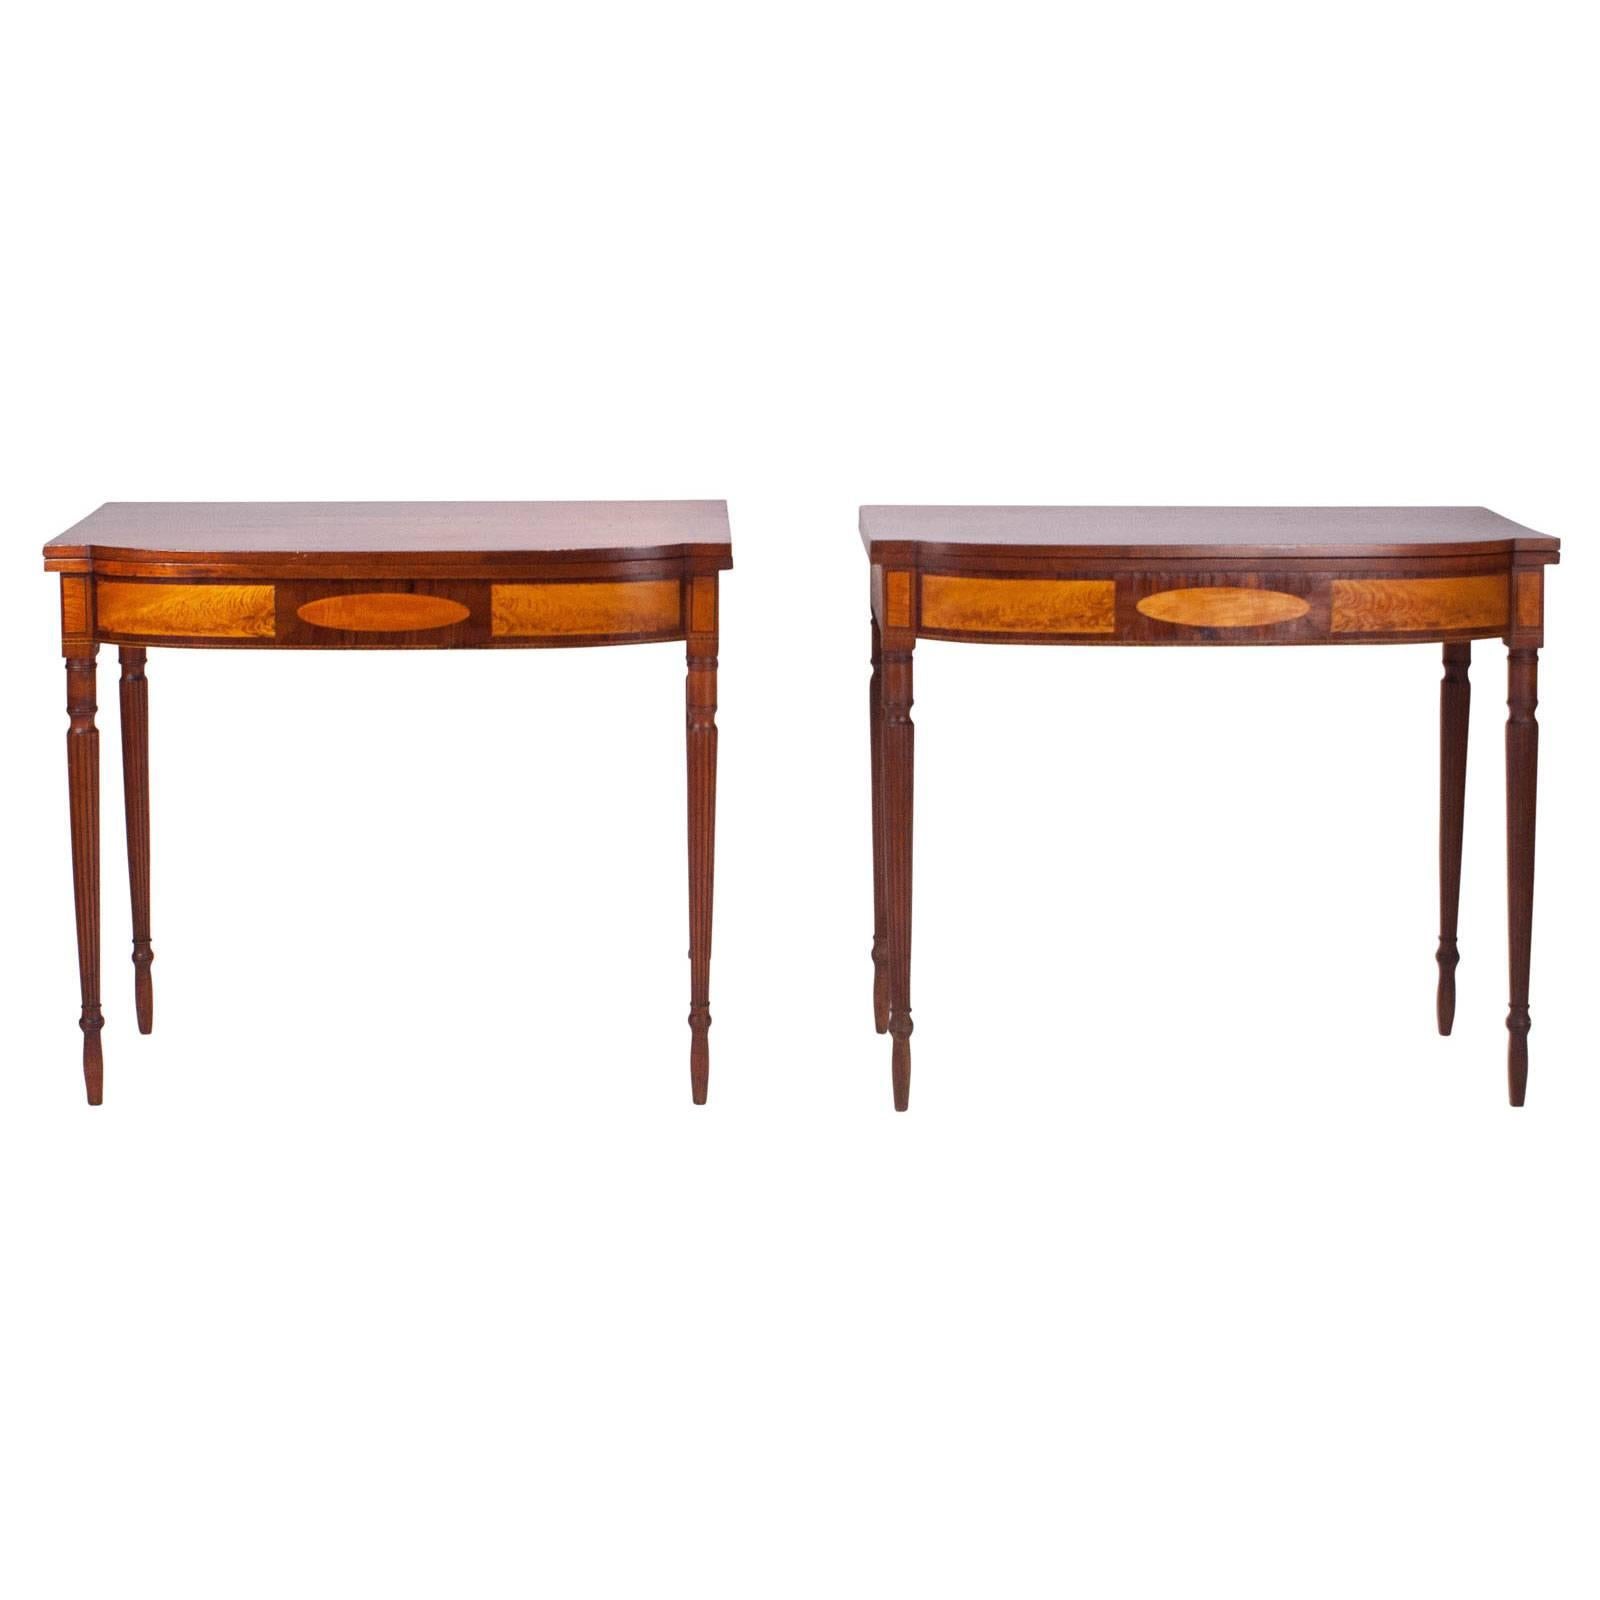 A pair of American Federal inlaid games tables on reeded turned tapered legs, New England region circa 1810. The tables are mahogany inlaid with satinwood, rosewood and checked stringing. One top refinished.